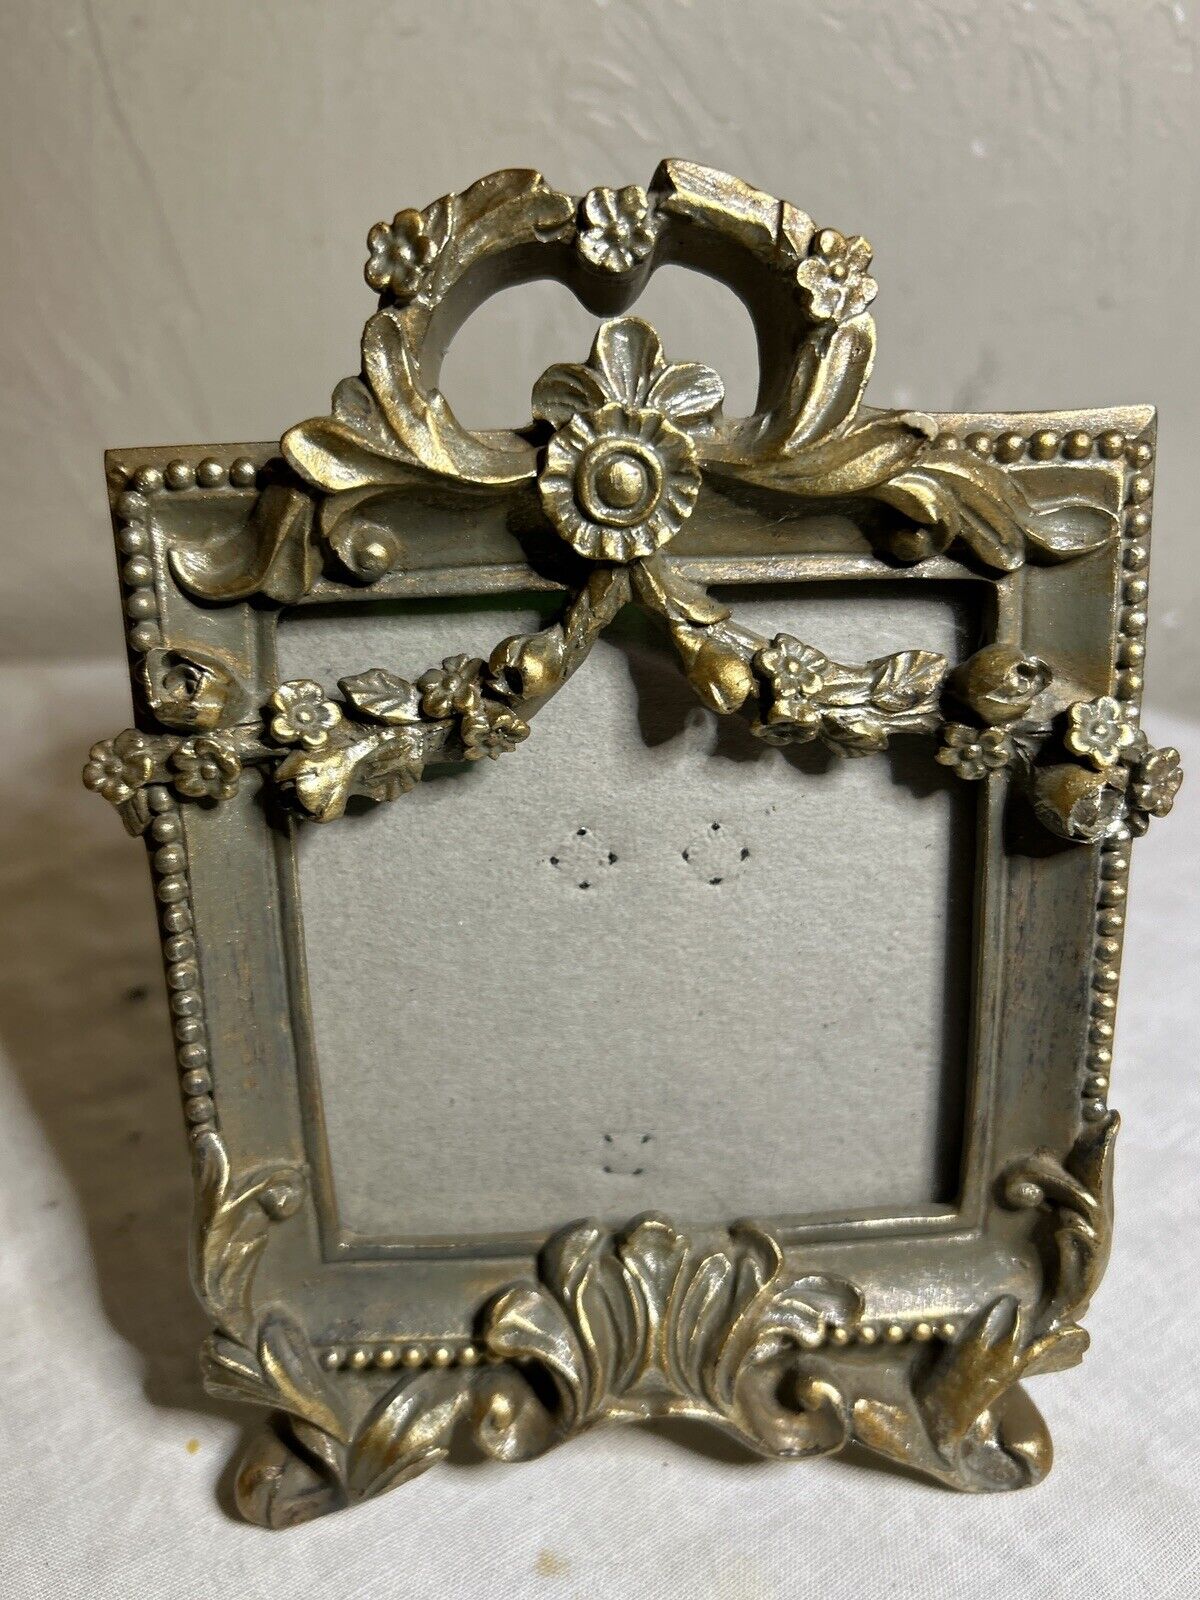 Vintage Gold Brushed Ornate Floral Picture Frame 7x5 Picture Size 4x4 inches.